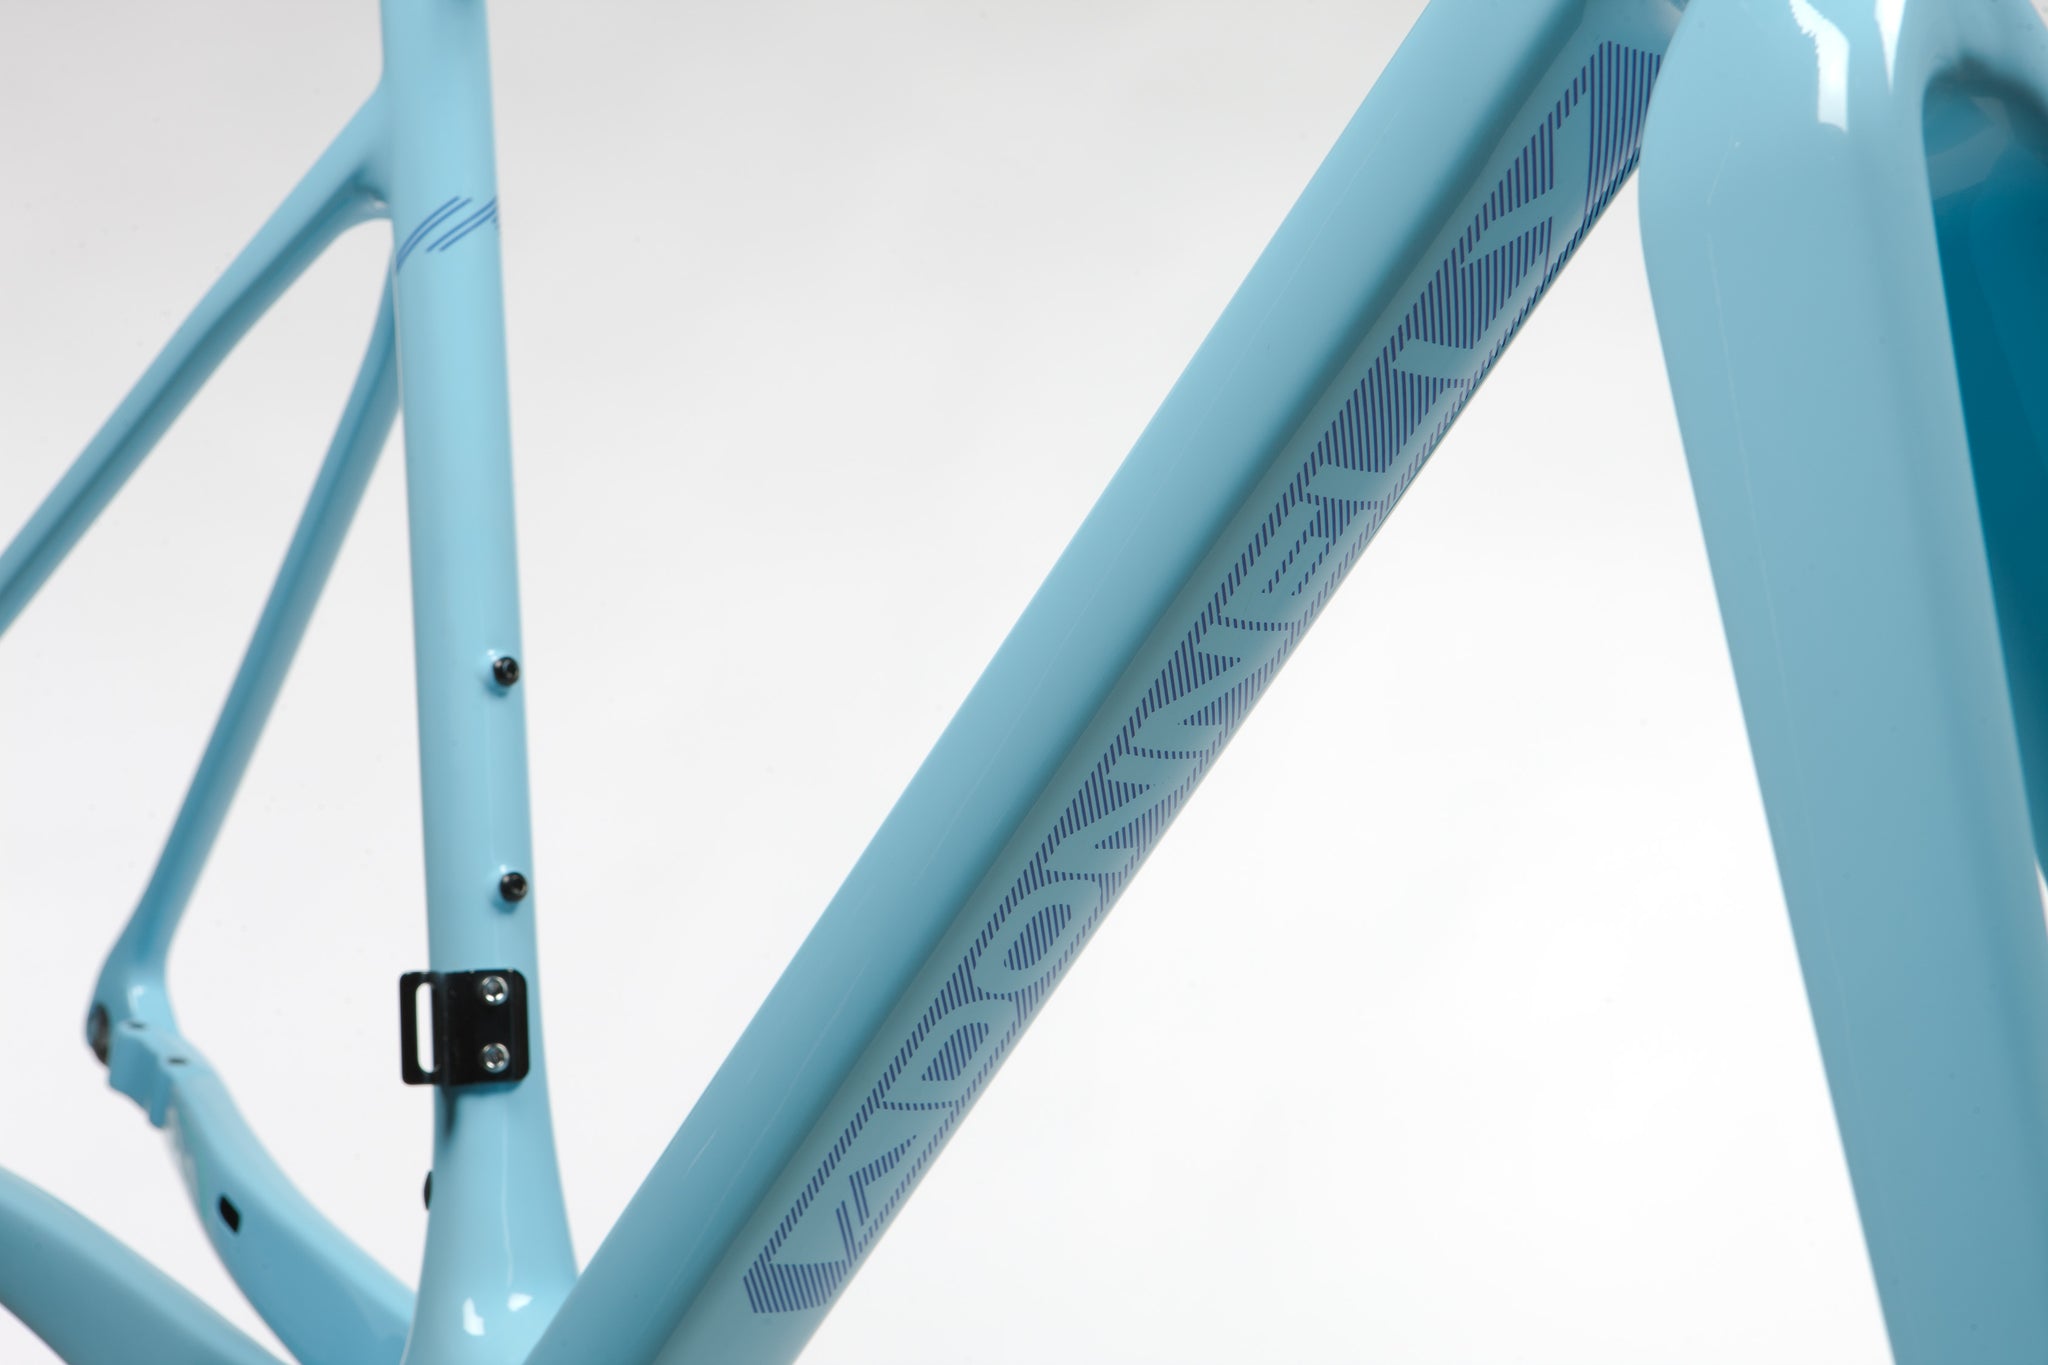 Downtube Donnelly C//C Cylocross Frame